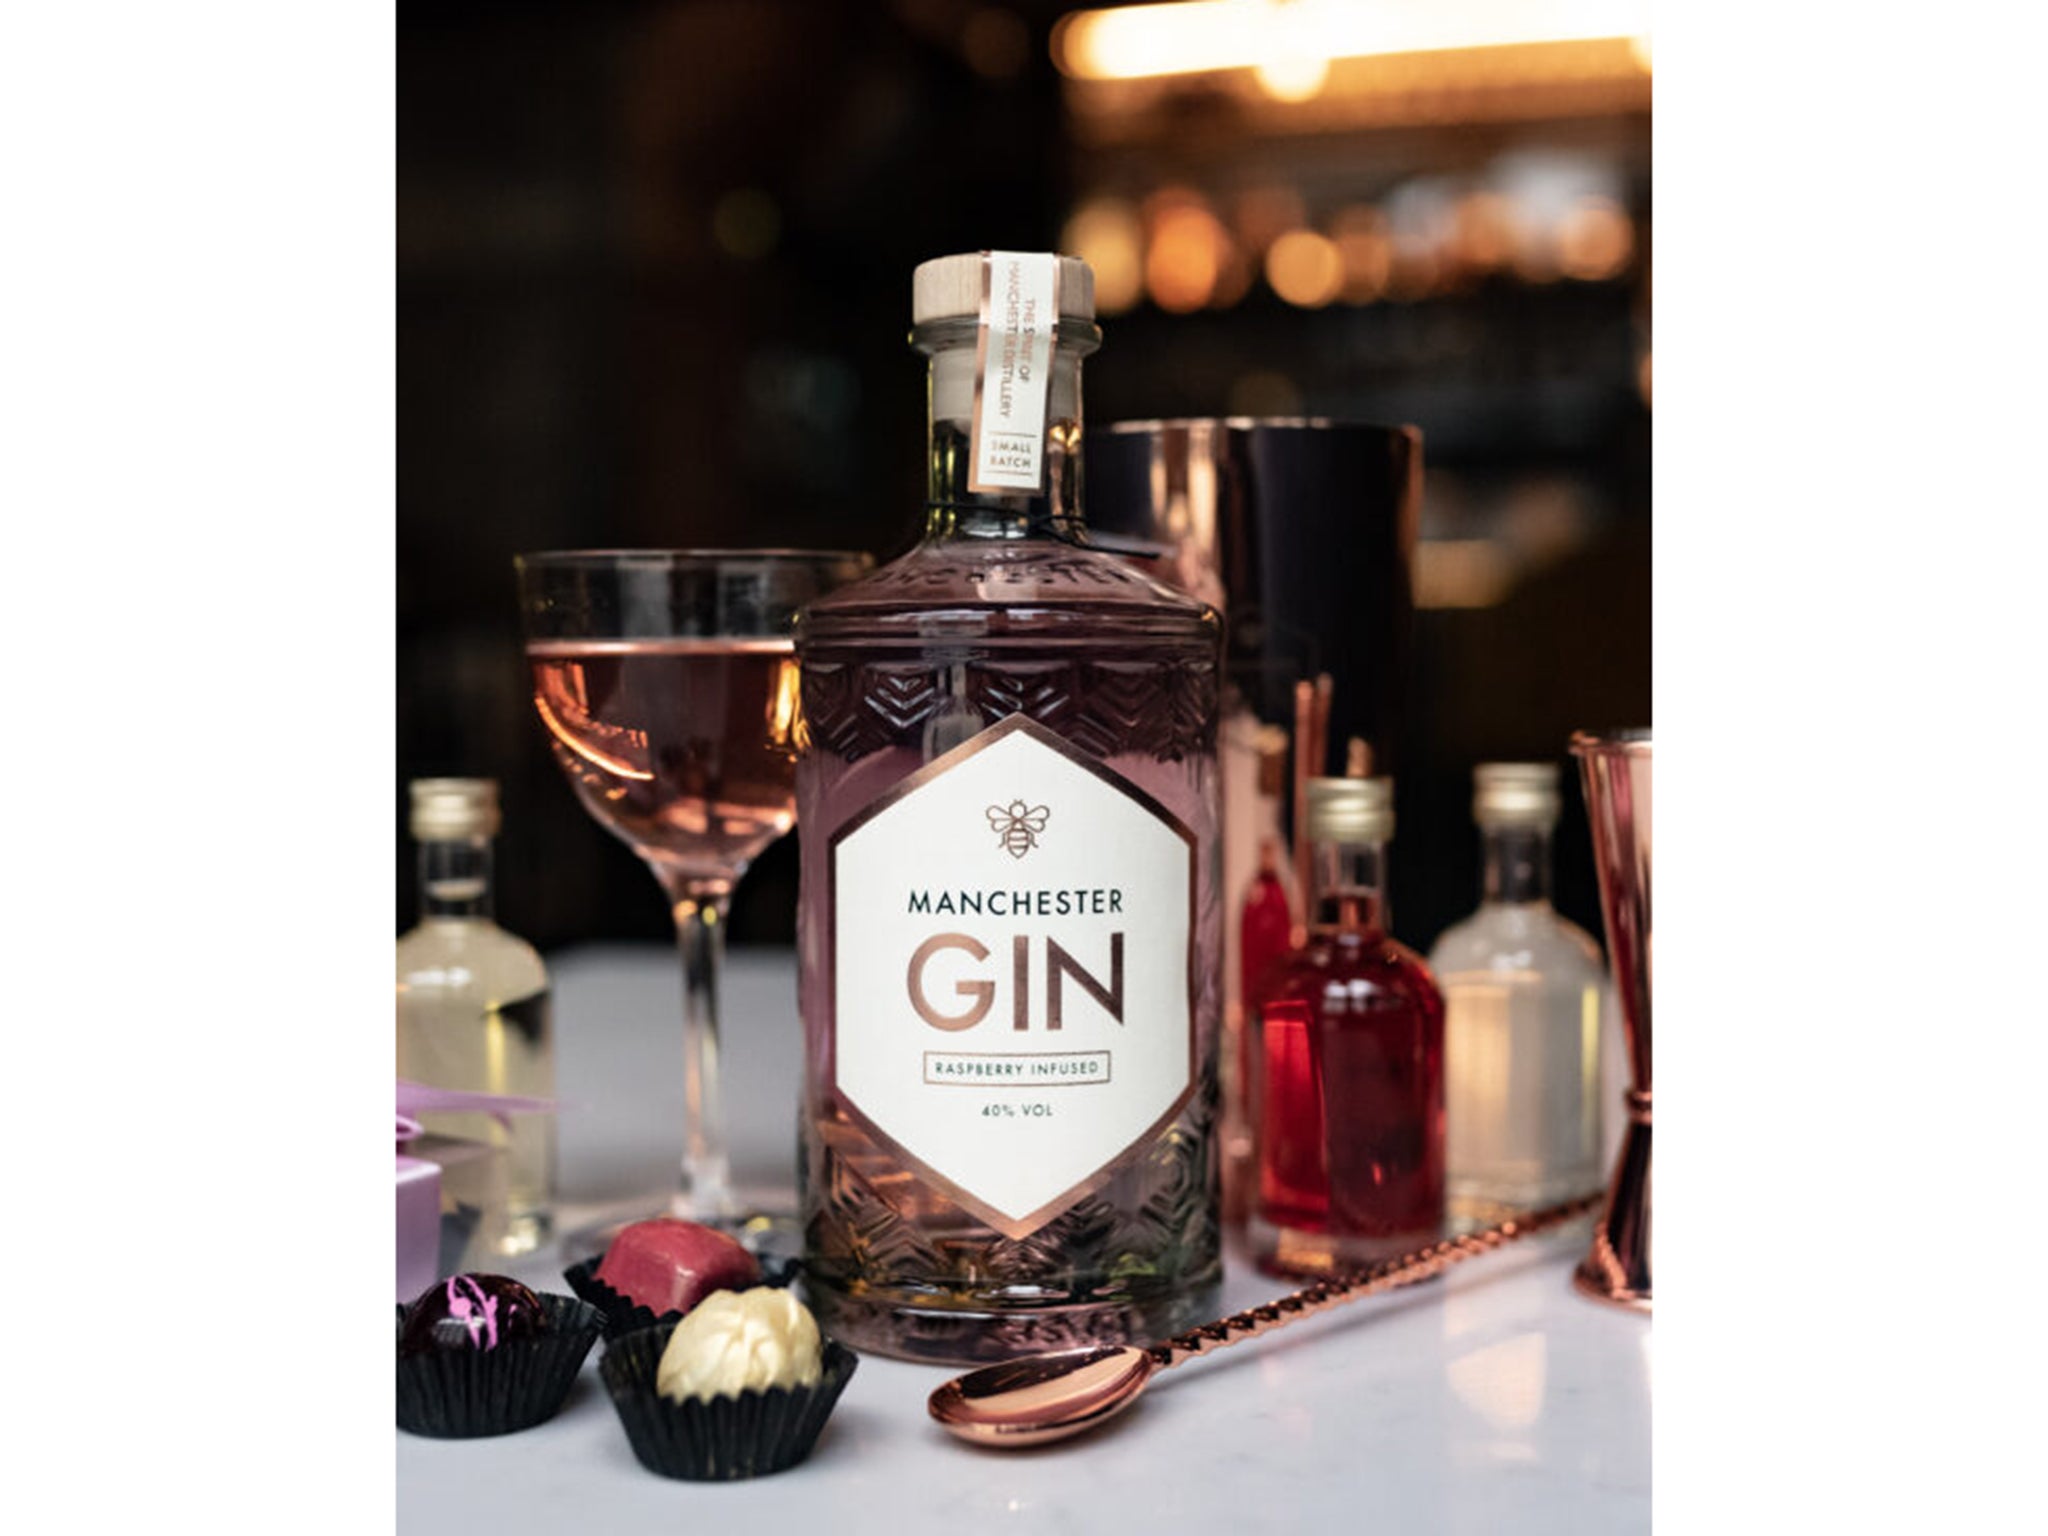 manchester-gin-at-home-cocktail-package-indybest.jpg